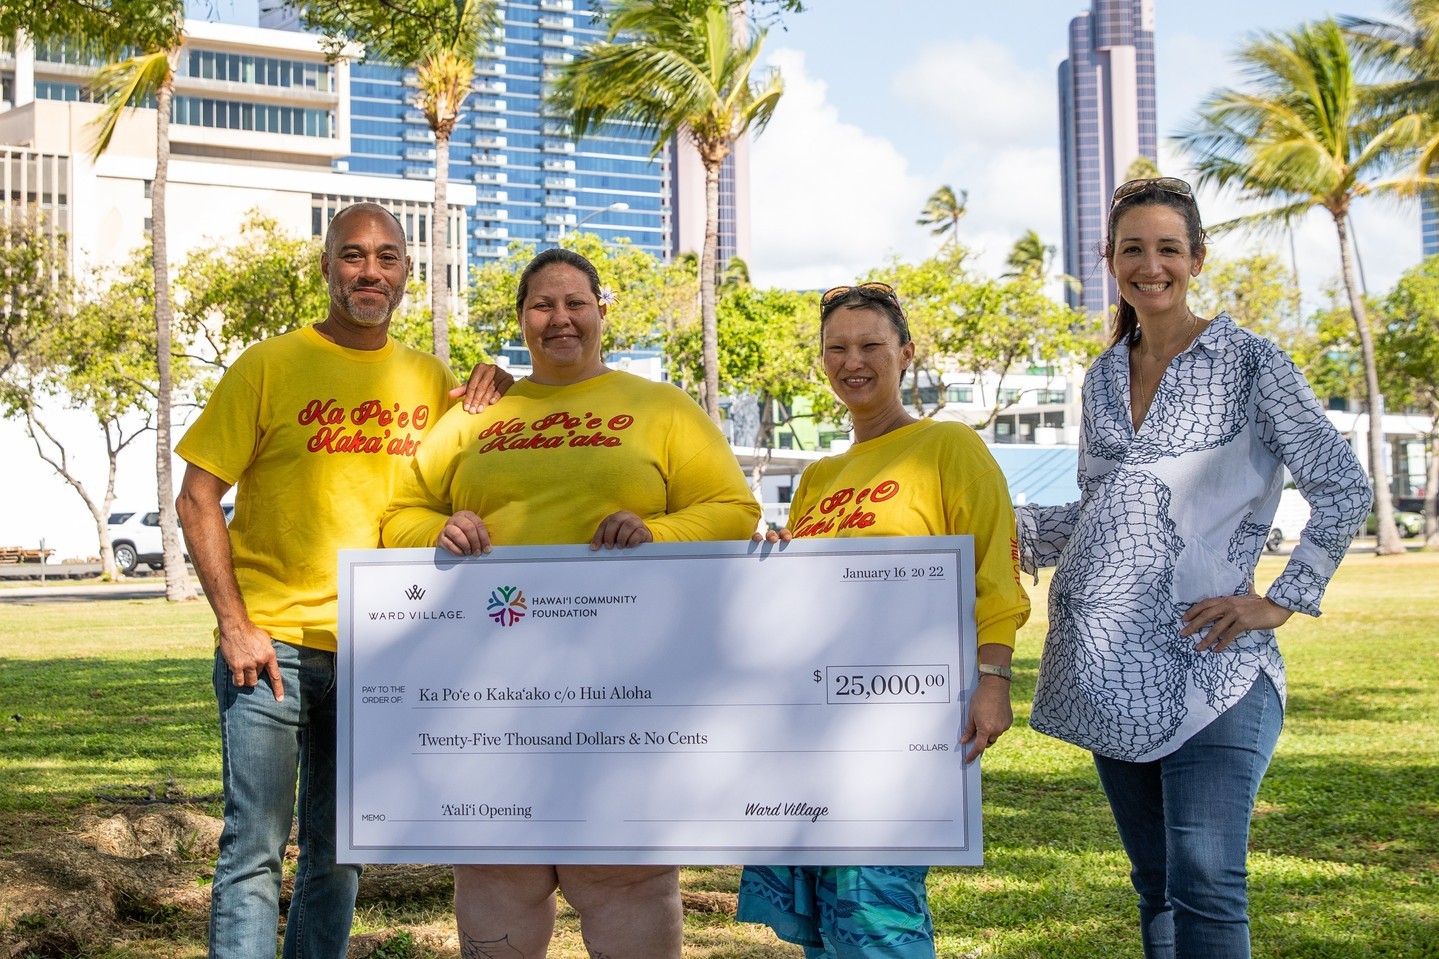 In celebration of the opening of ʻAʻaliʻi, Ward Village has partnered with Affordable Hawaiʻi for All Fellows and Ka Poʻe o Kakaʻako by funding $25,000 towards current fellows of the program to continue their fellowship in advocating and designing an affordable and inclusive Hawaiʻi for all.